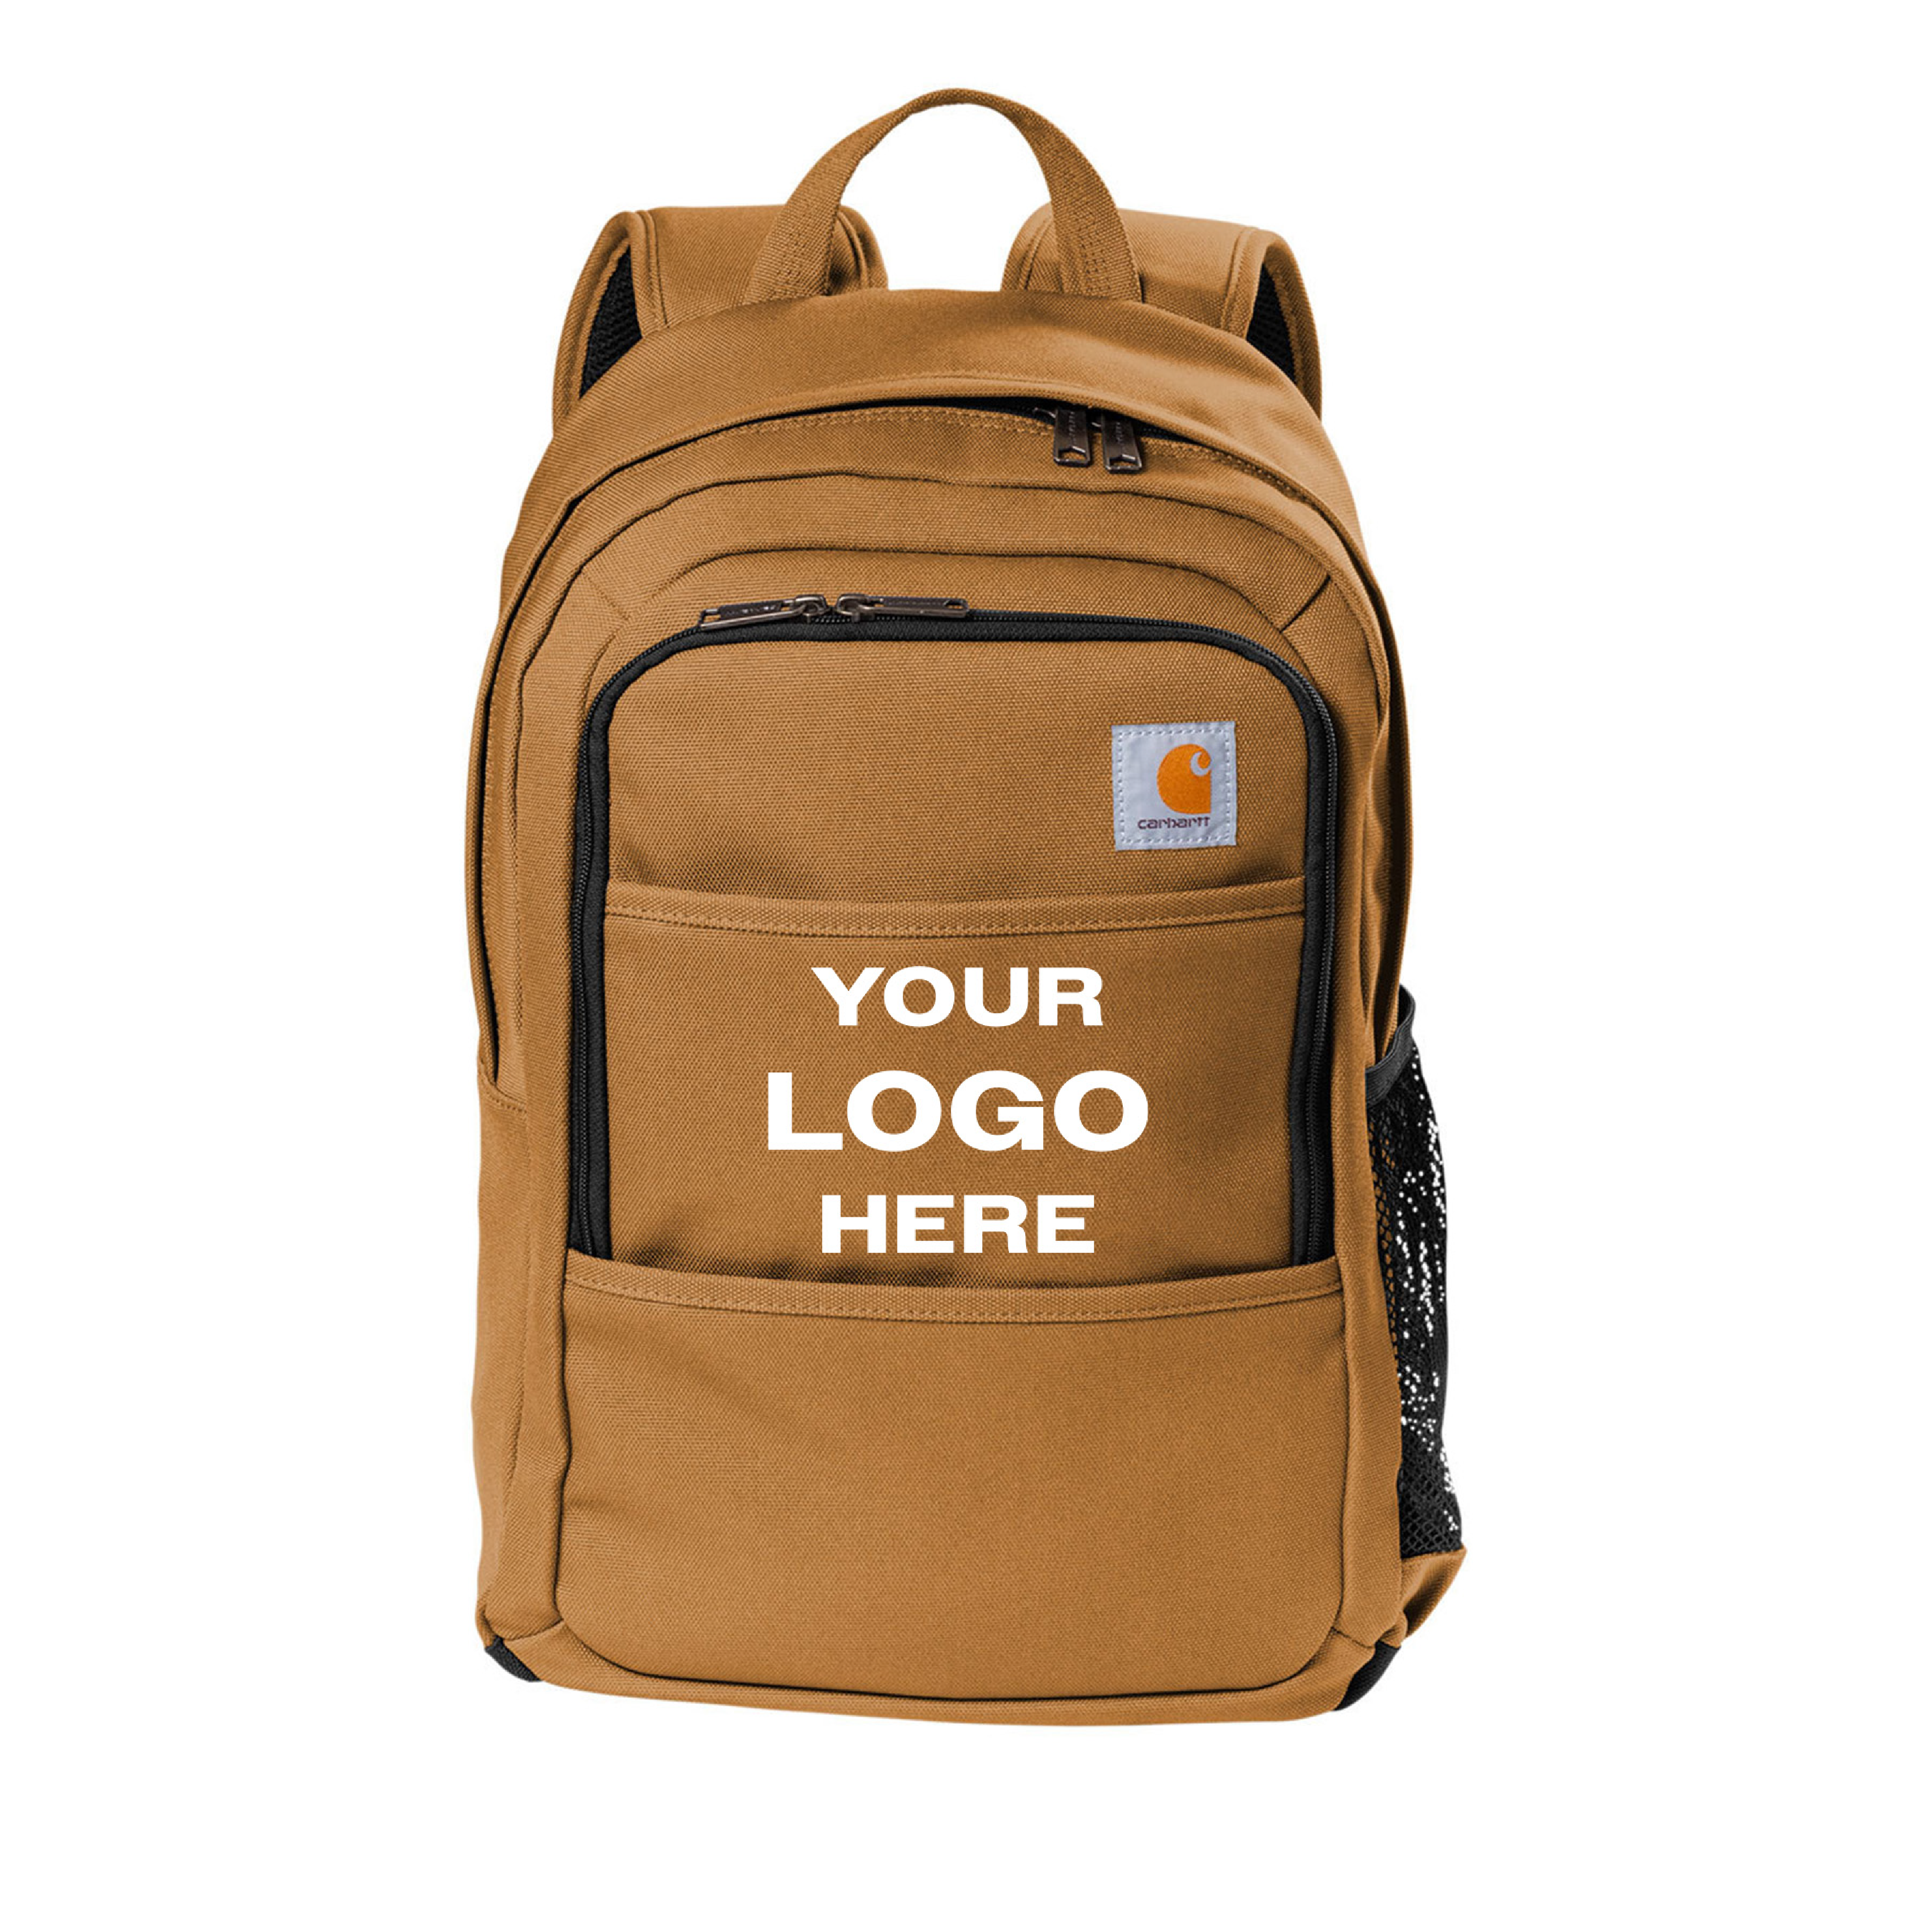 Carhartt® Foundry Series Backpack with Embroidery